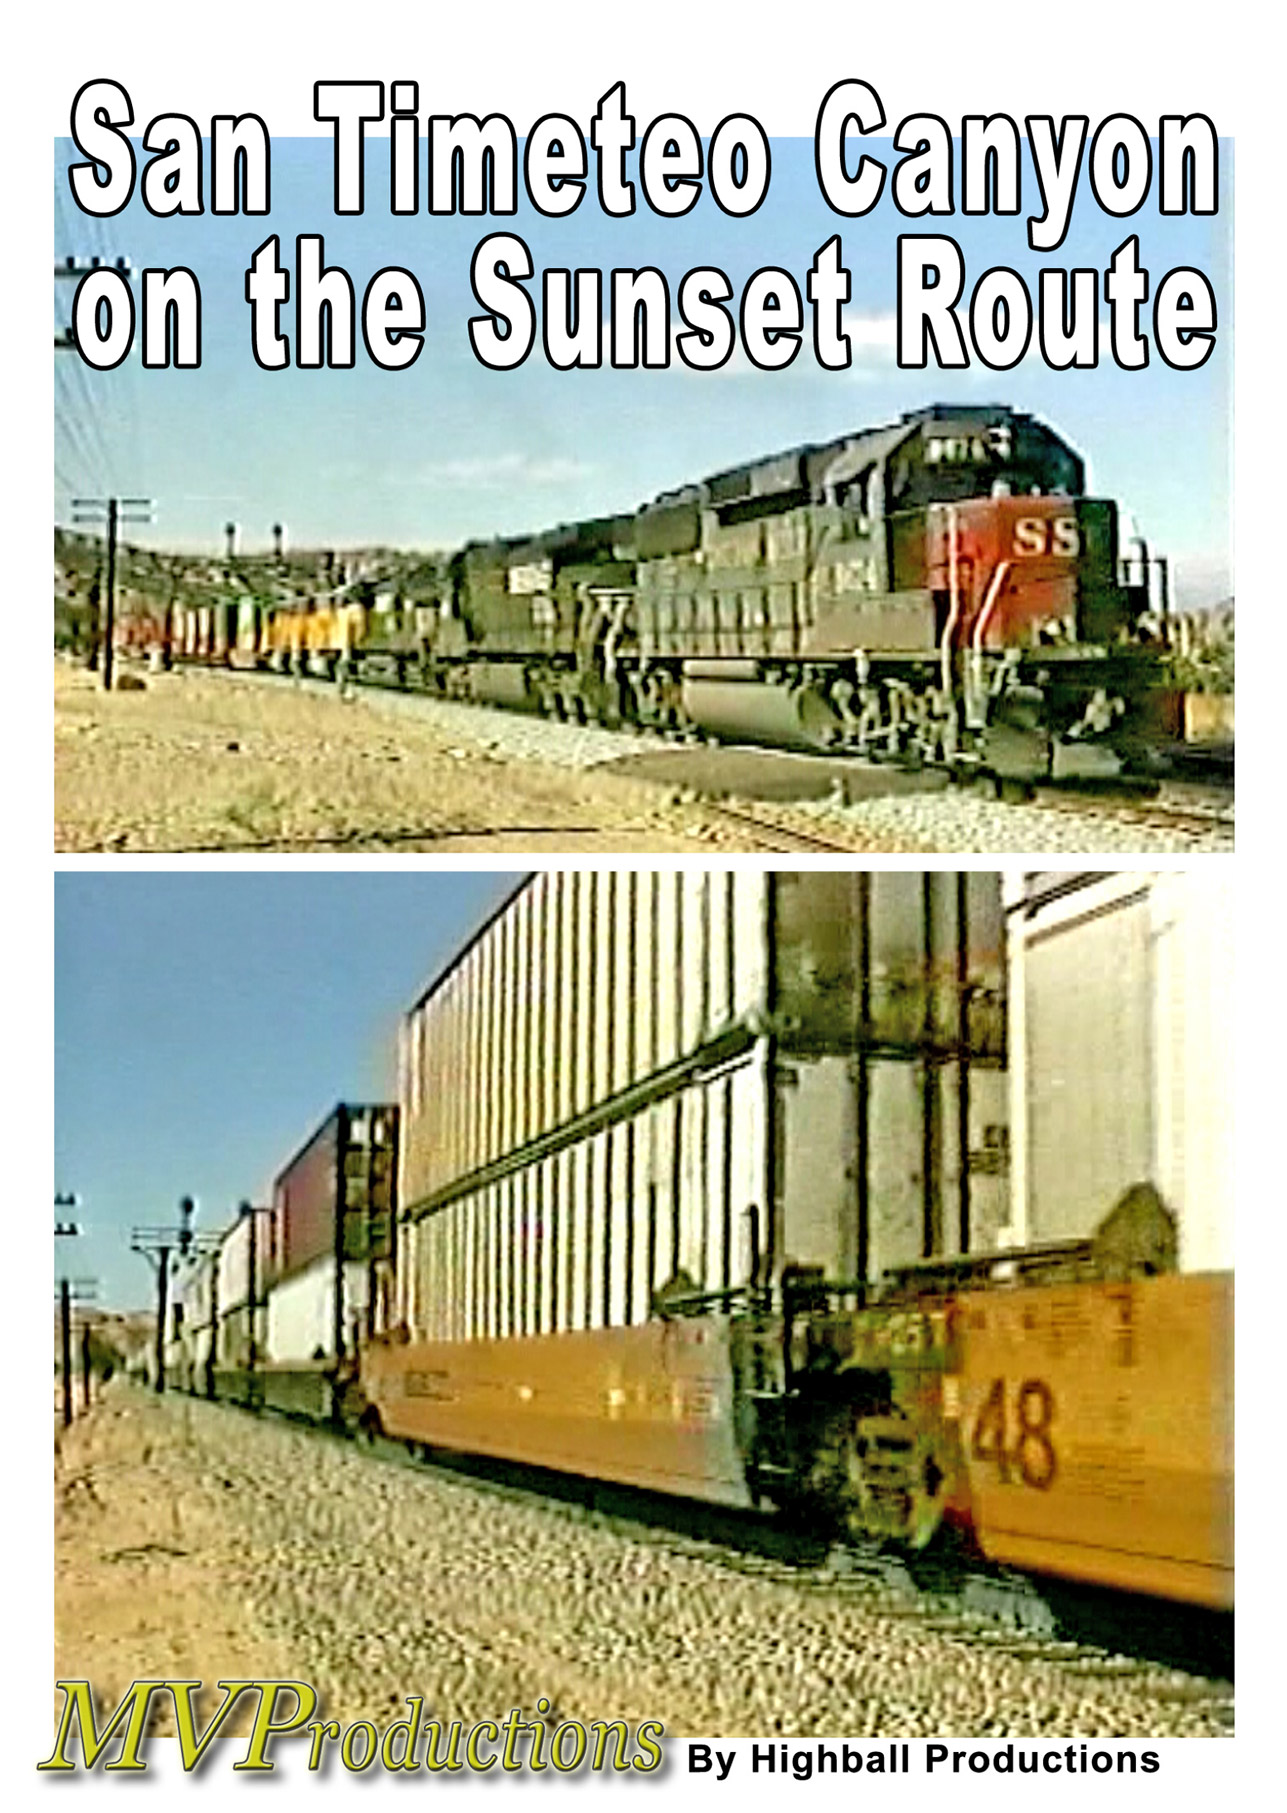 San Timoteo Canyon on the Sunset Route Midwest Video Productions MVSTC 601577880202